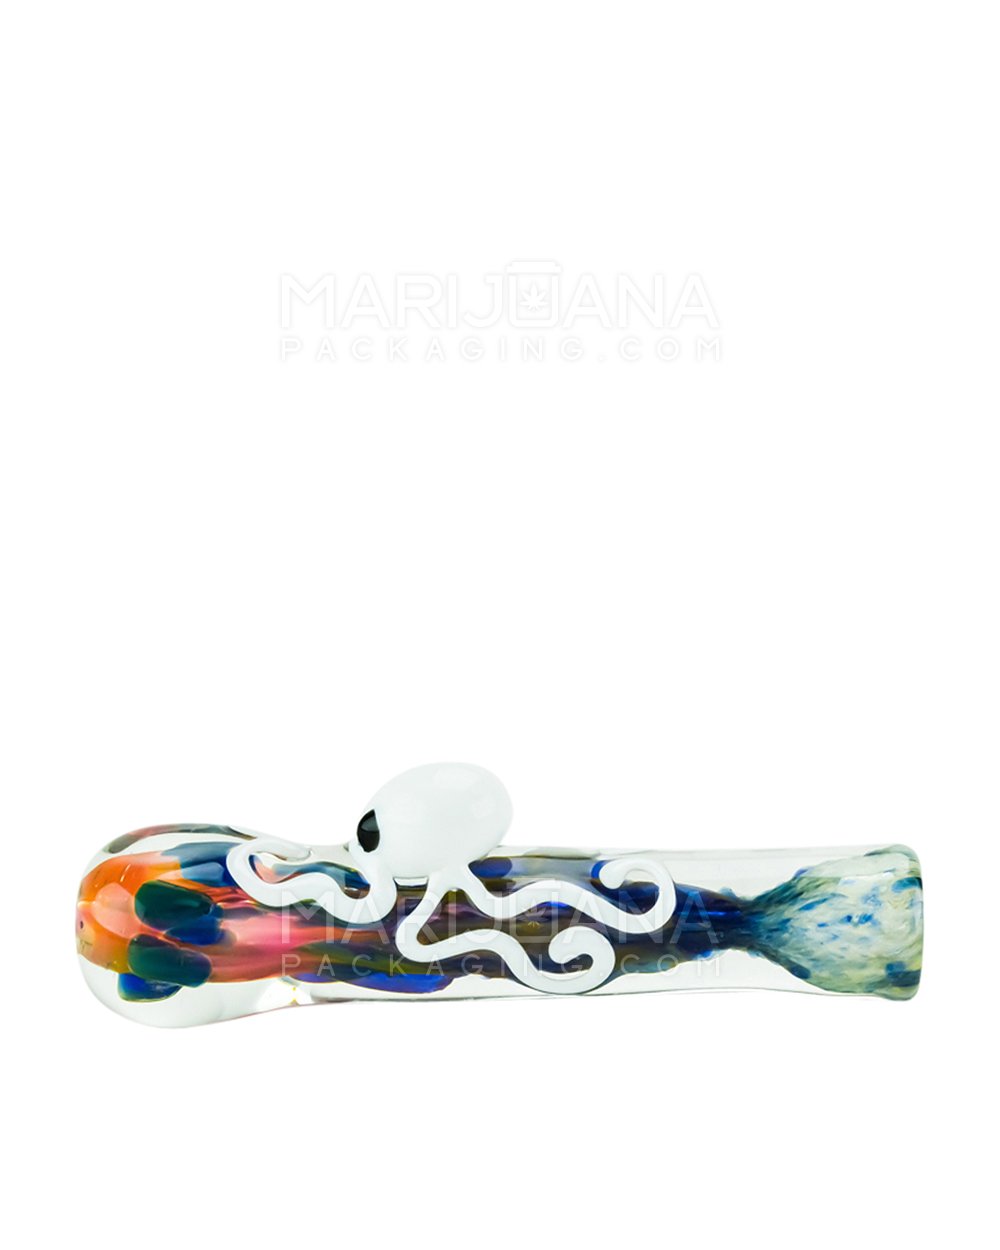 Frit & Multi Fumed Chillum Hand Pipe w/ Glass Squid & Speckles | 3.5in Long - Glass - Assorted - 4